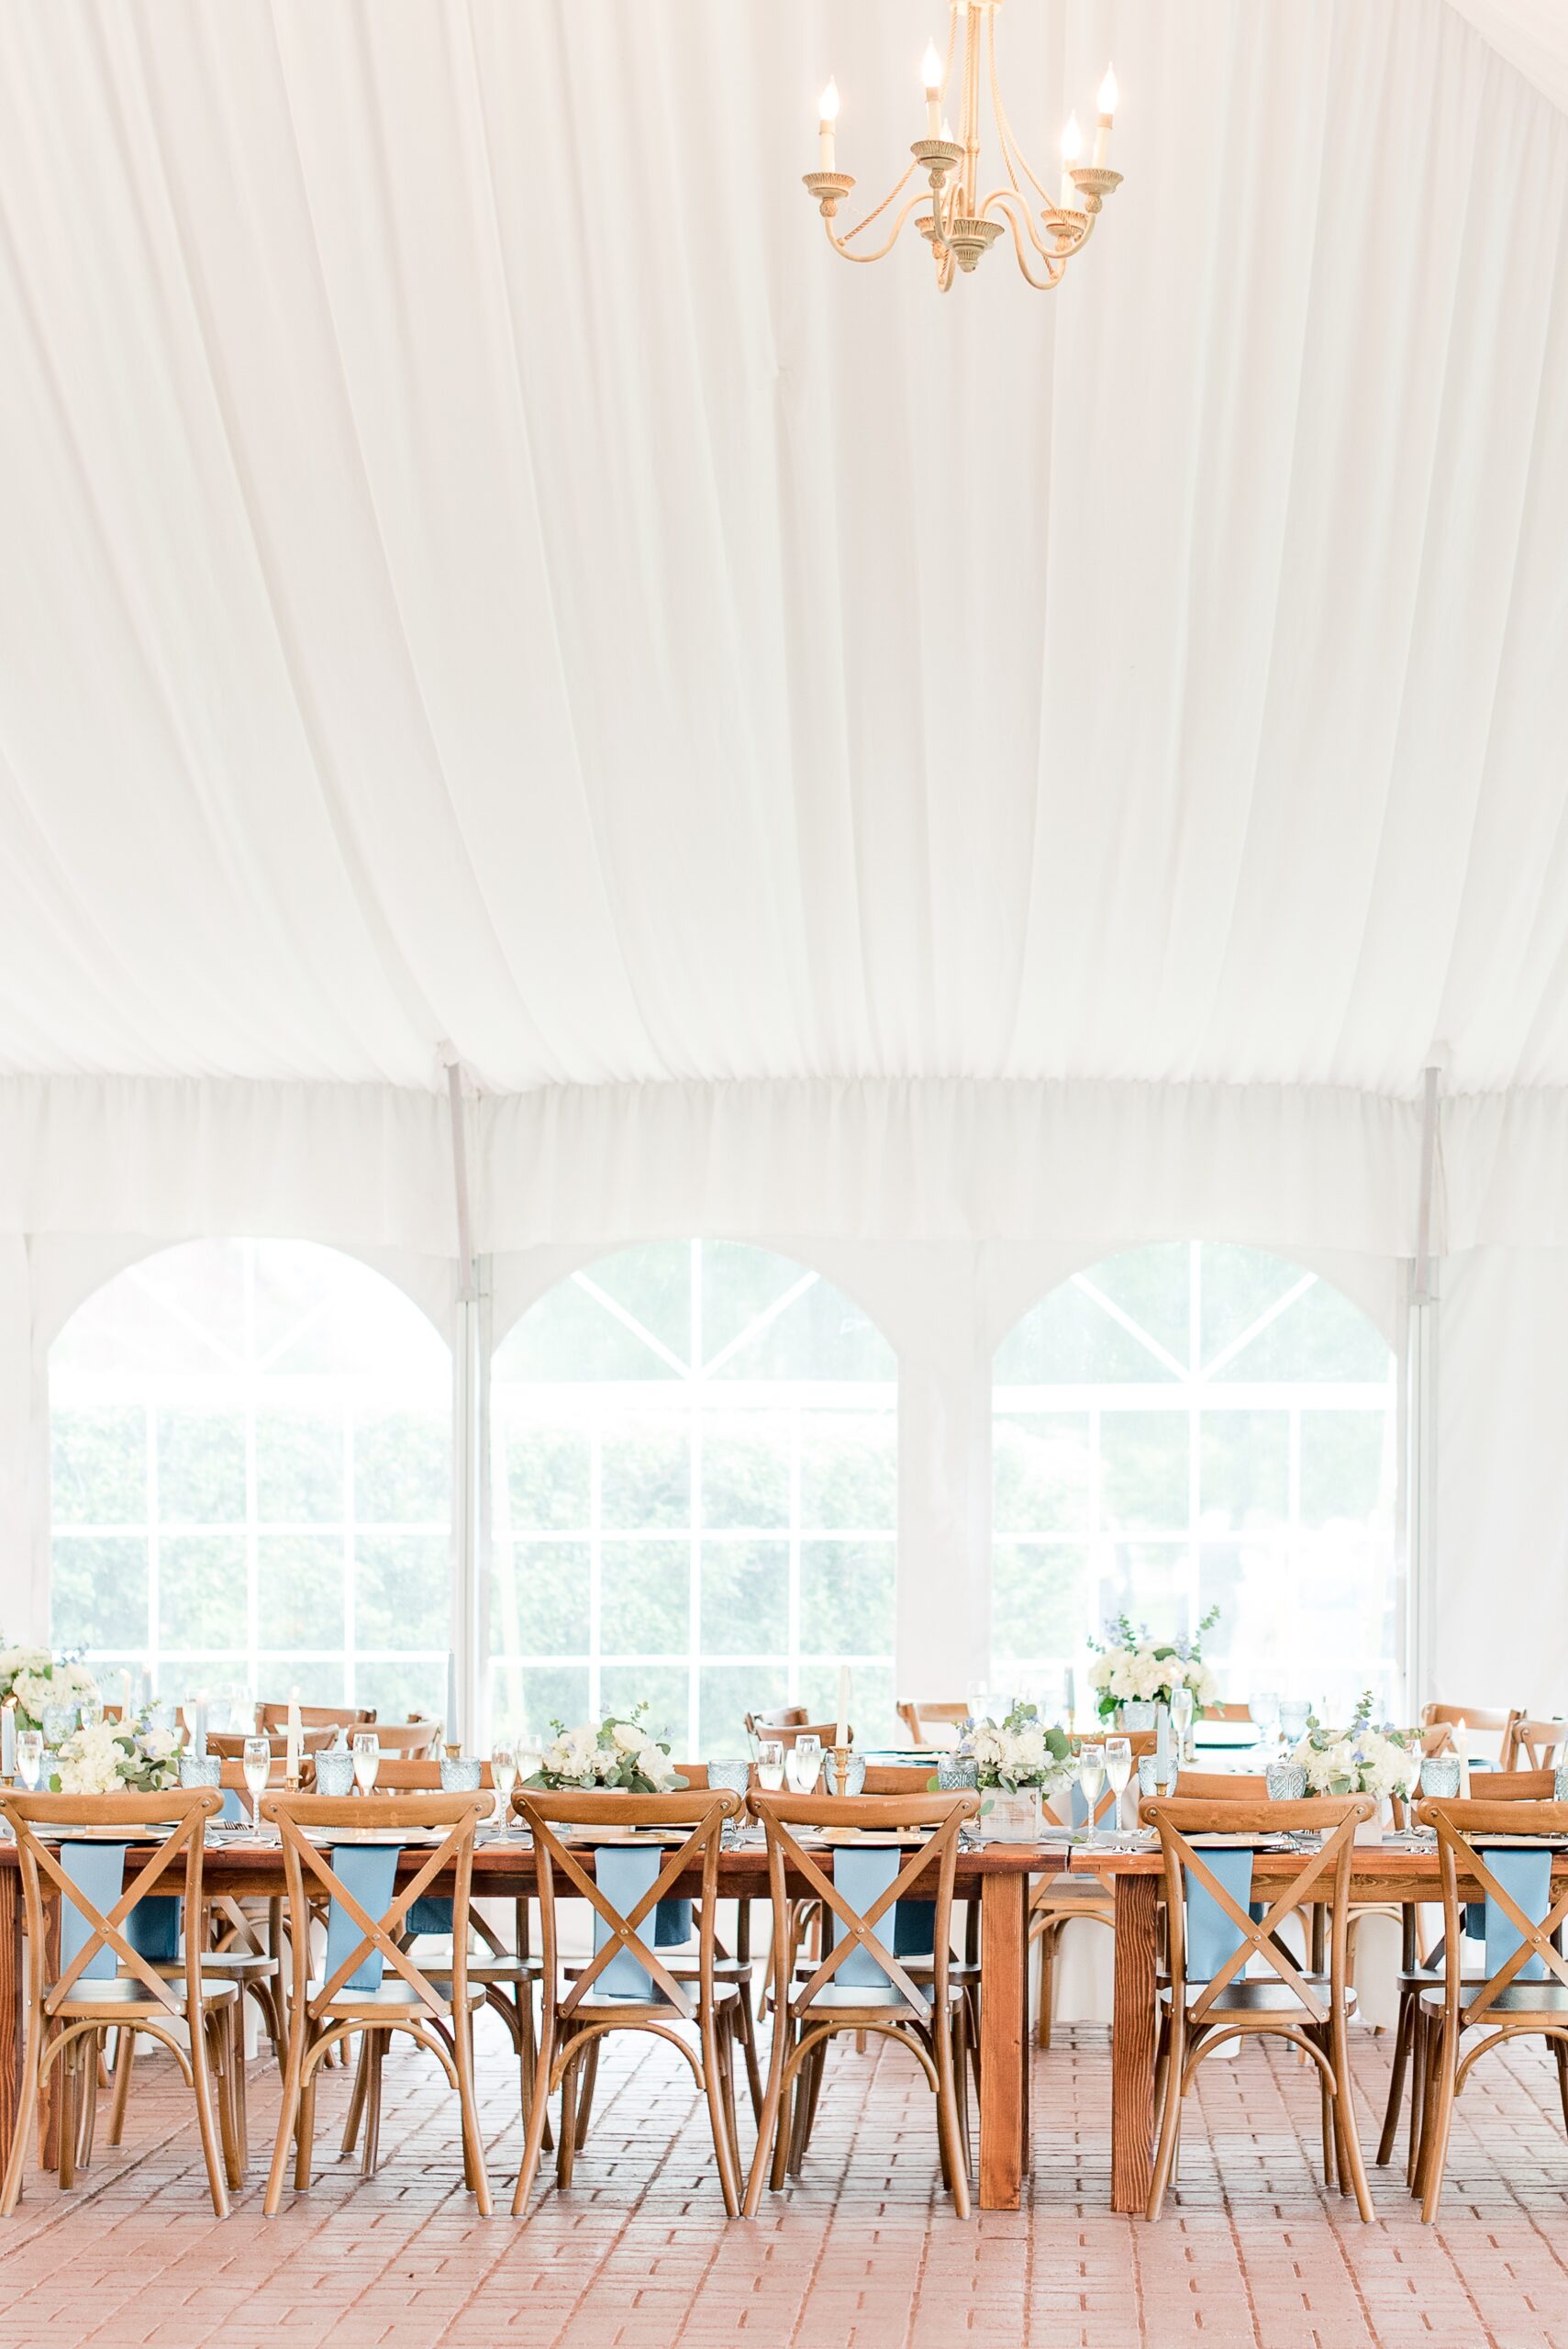 Details of a tent wedding with wooden tables and chairs and a high chandelier at a Swan Harbor Farm Wedding